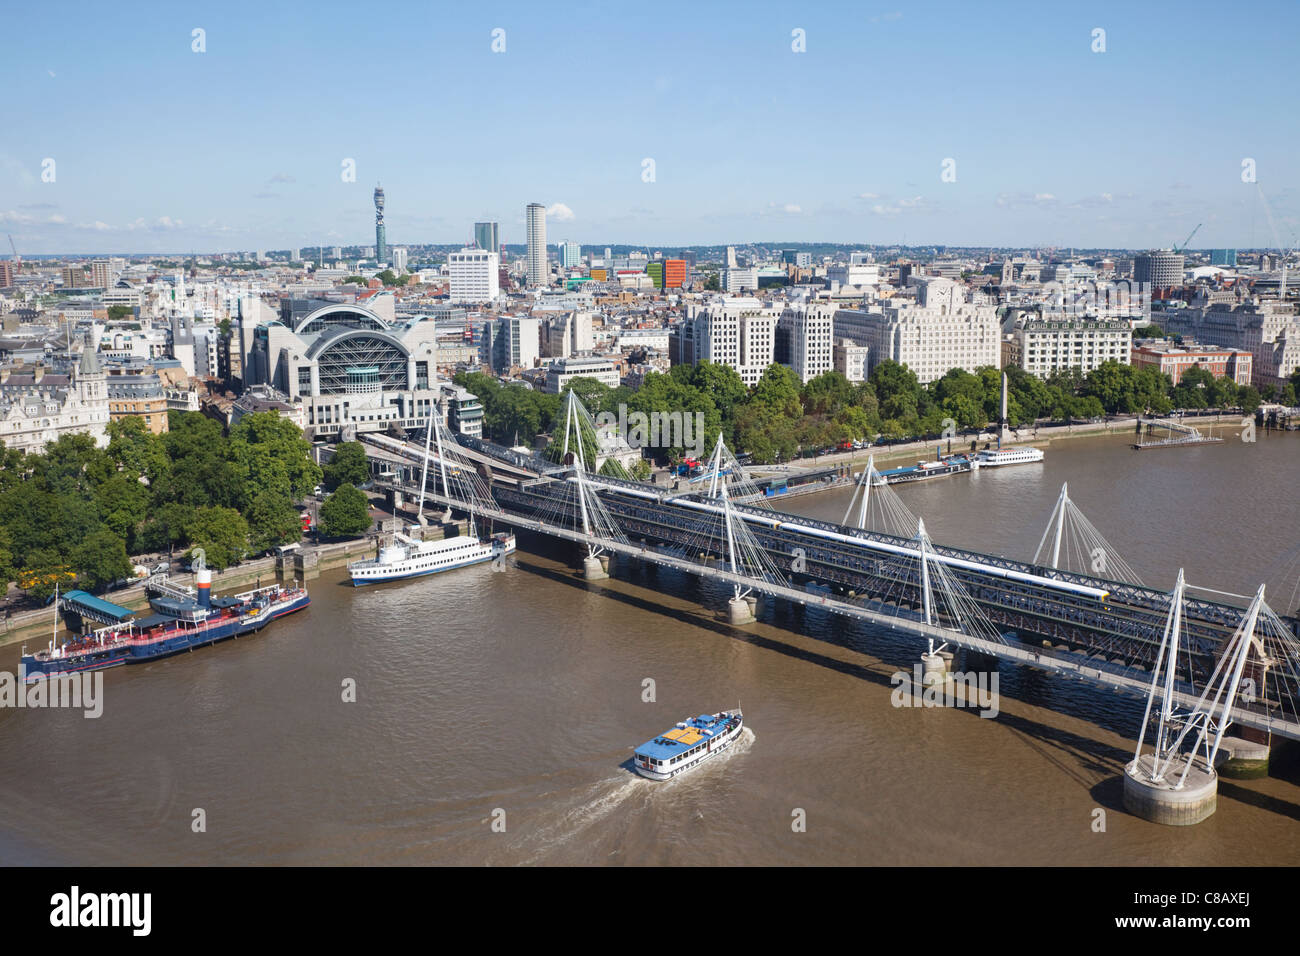 England, London, Hungerford Bridge and River Thames, View from the London Eye Stock Photo